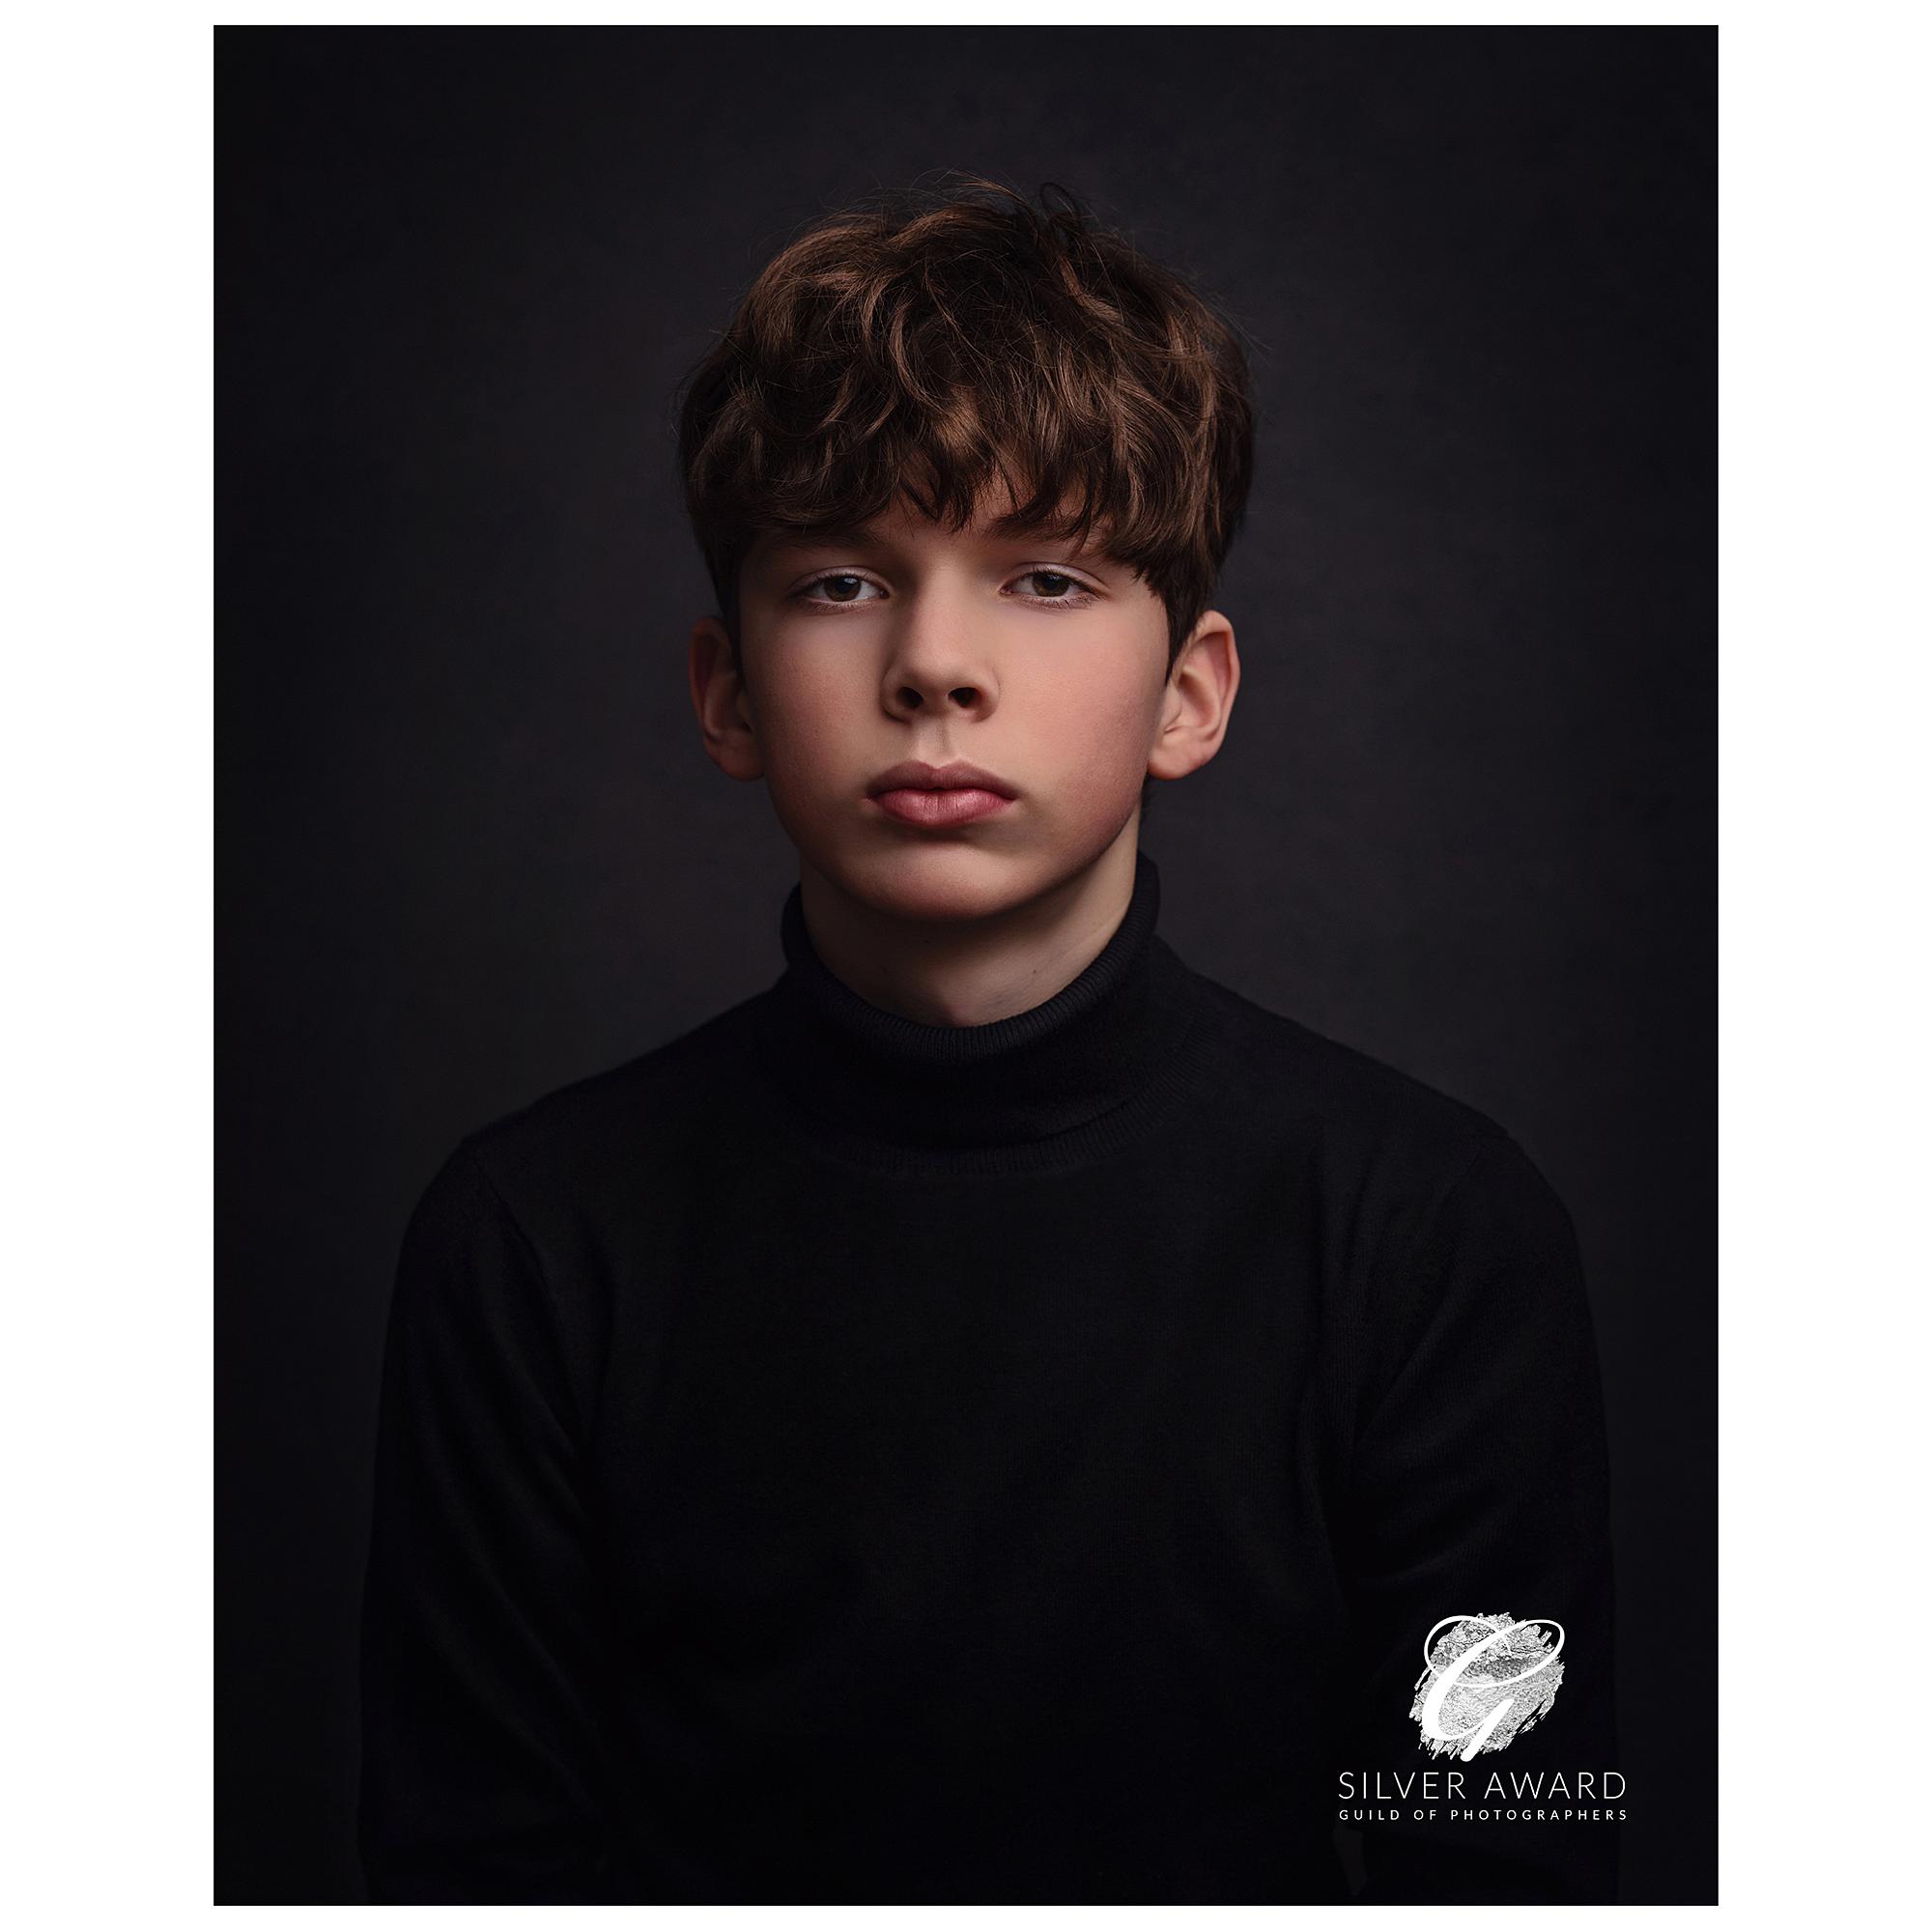 Fine Art Portrait of a Teenage Boy in a black polo neck jumper wins a Silver Award from the Guild of Photographers